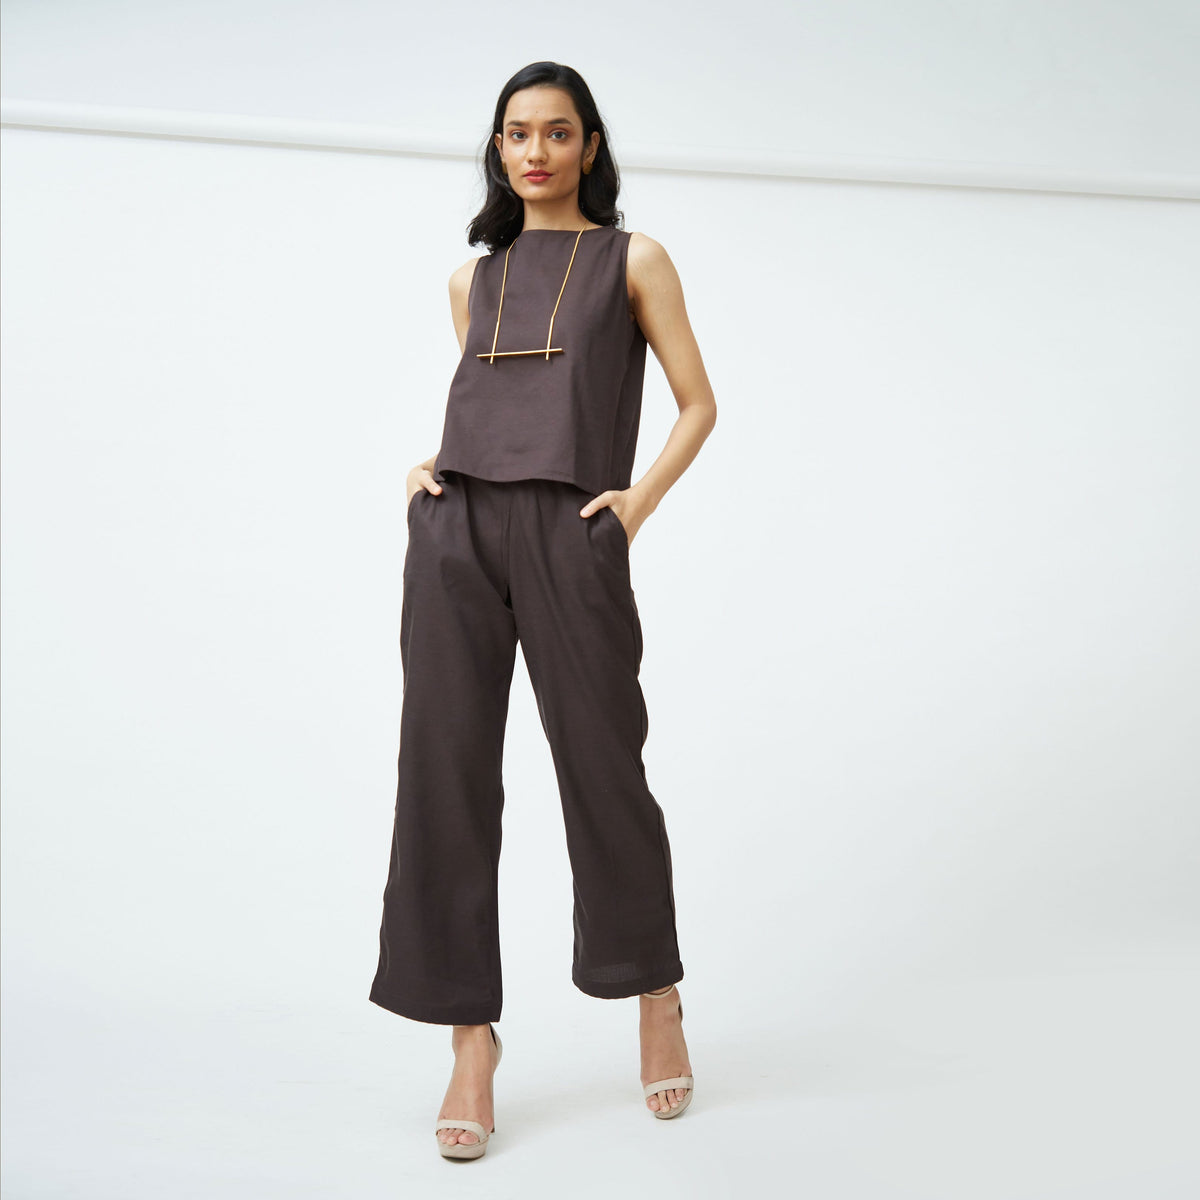 Saltpetre womens western wear in 100% organic cotton set for semi formal, casual, occassional wear. Comfortable, simple and elegant boat neck sleeveless top and ankle length pants in coffee brown.